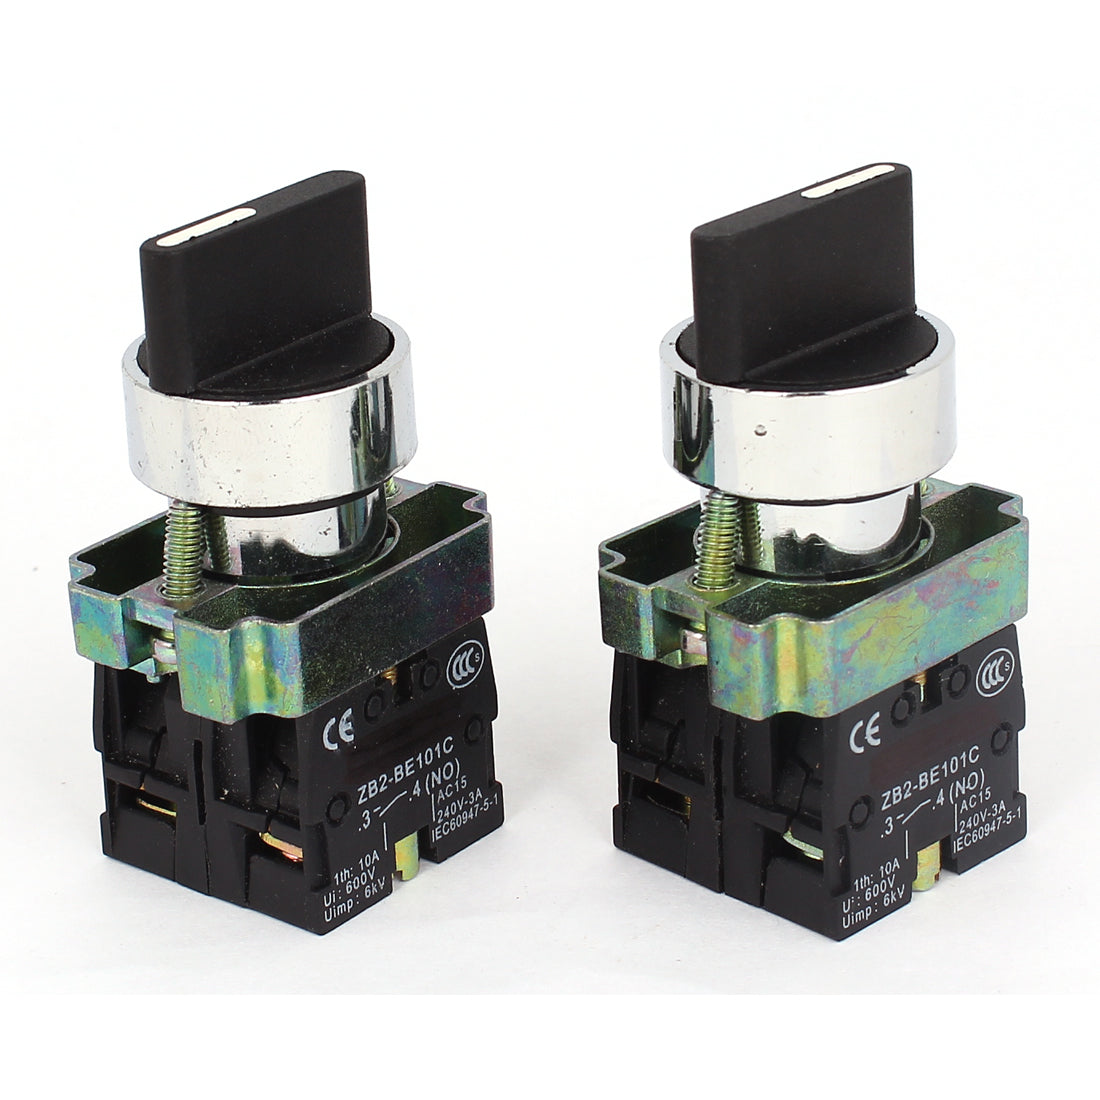 uxcell Uxcell ZB2-BE101C 2NO DPST 3 Positions Maintained Rotary Selector Switch 600V 10A 2 Pcs